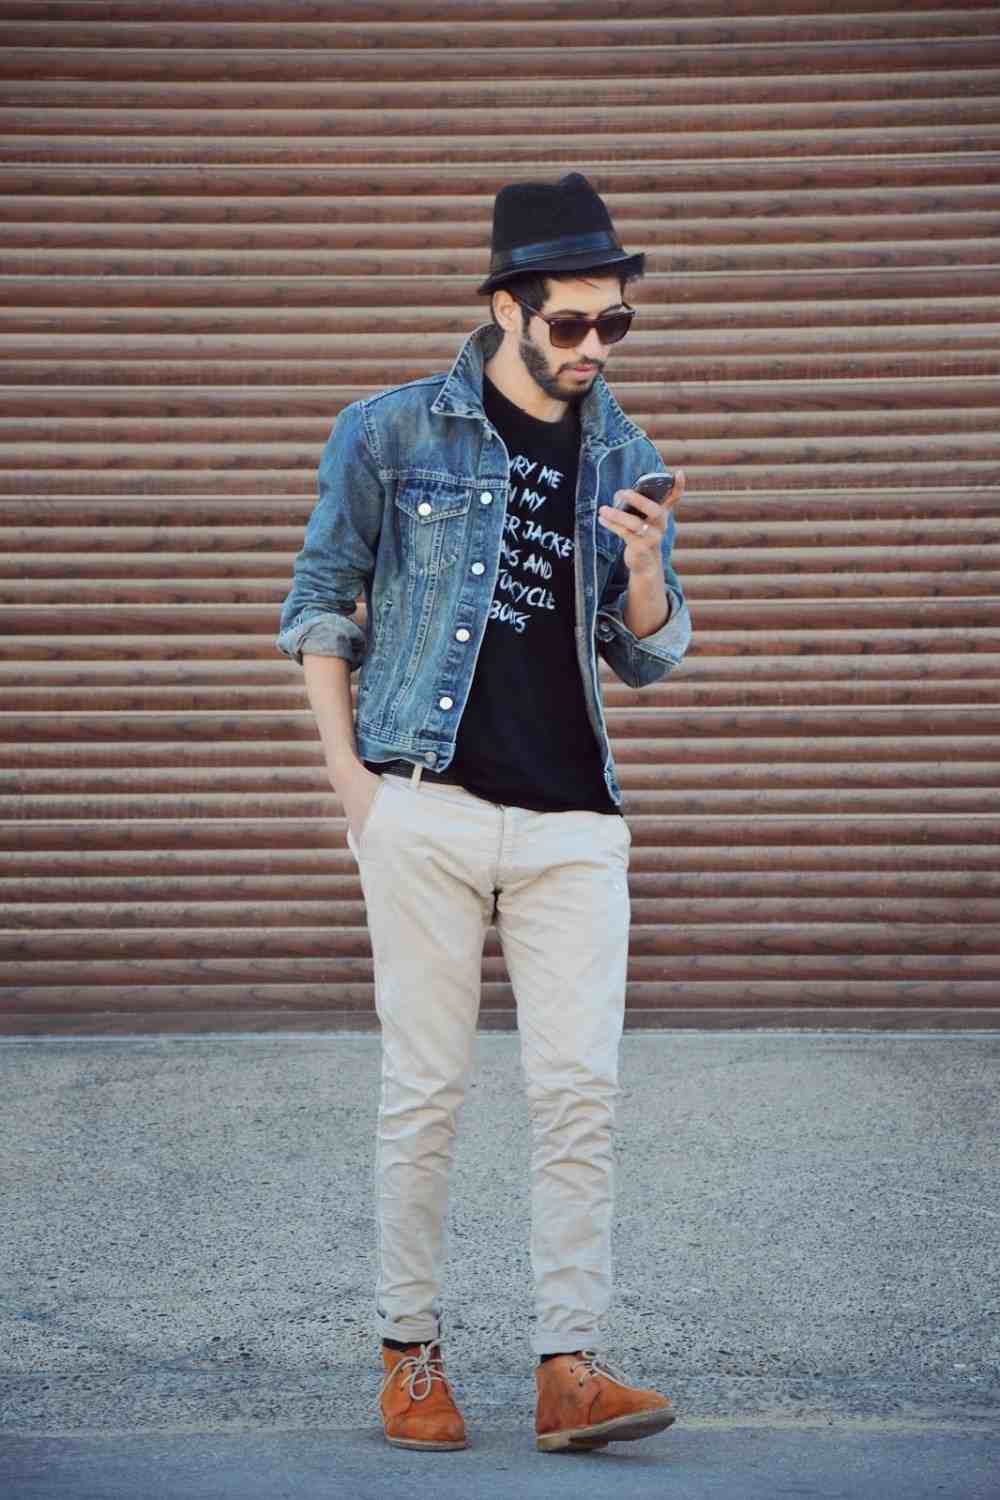 chino hose and boots in combination with a black t-shirt and hut as an accessory for men's fashion